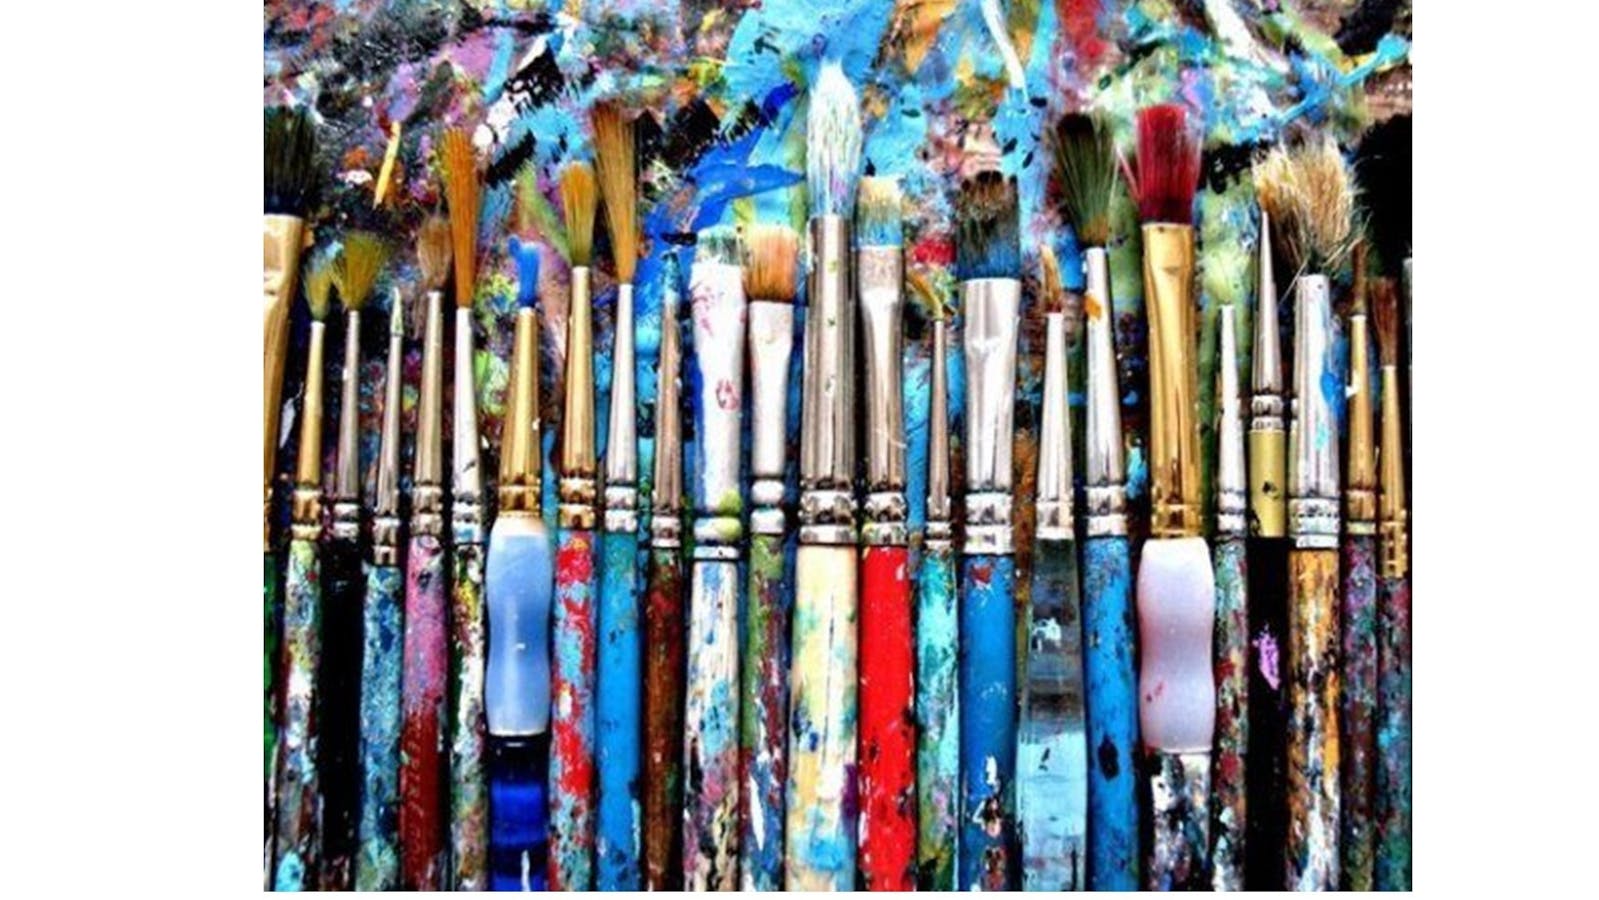 artists brushes